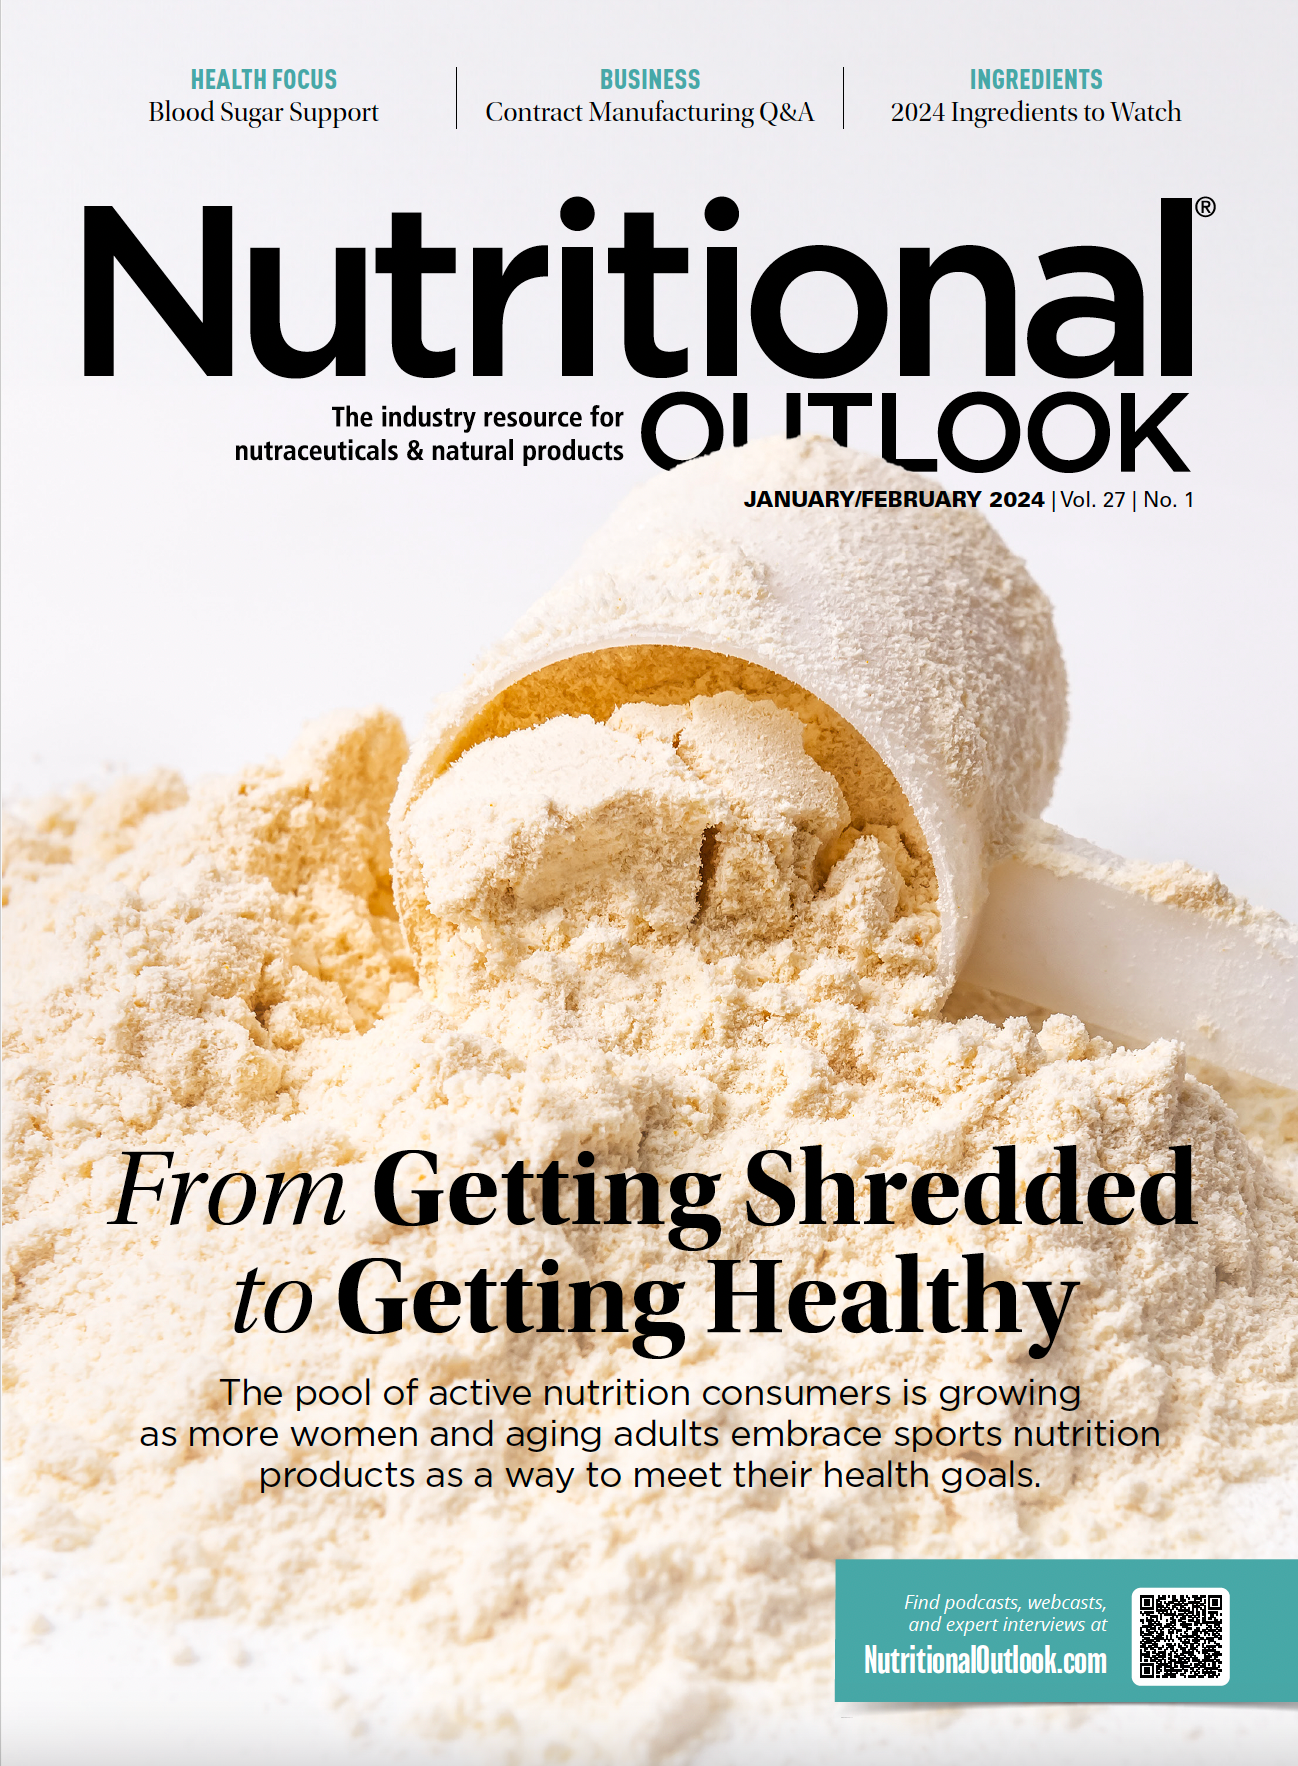 Nutritional Outlook Vol. 27 No. 1